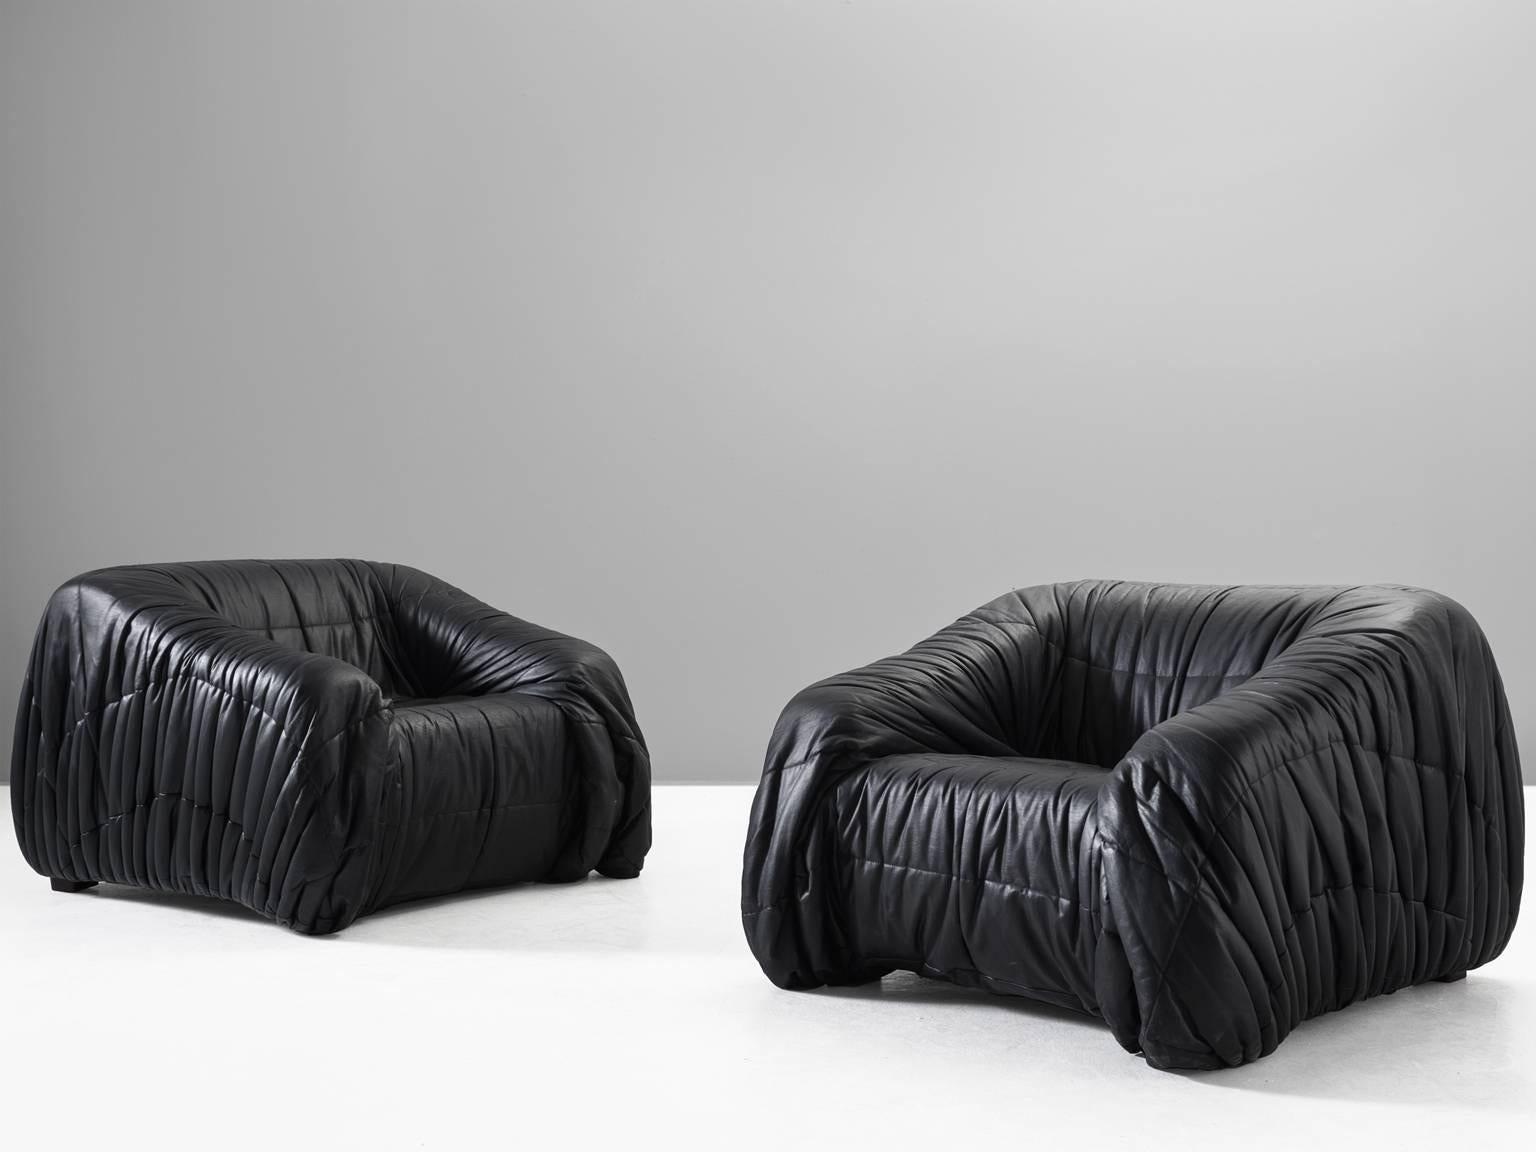 Post-Modern De Pas, D'urbino and Lomazzi Club Chairs in Leather